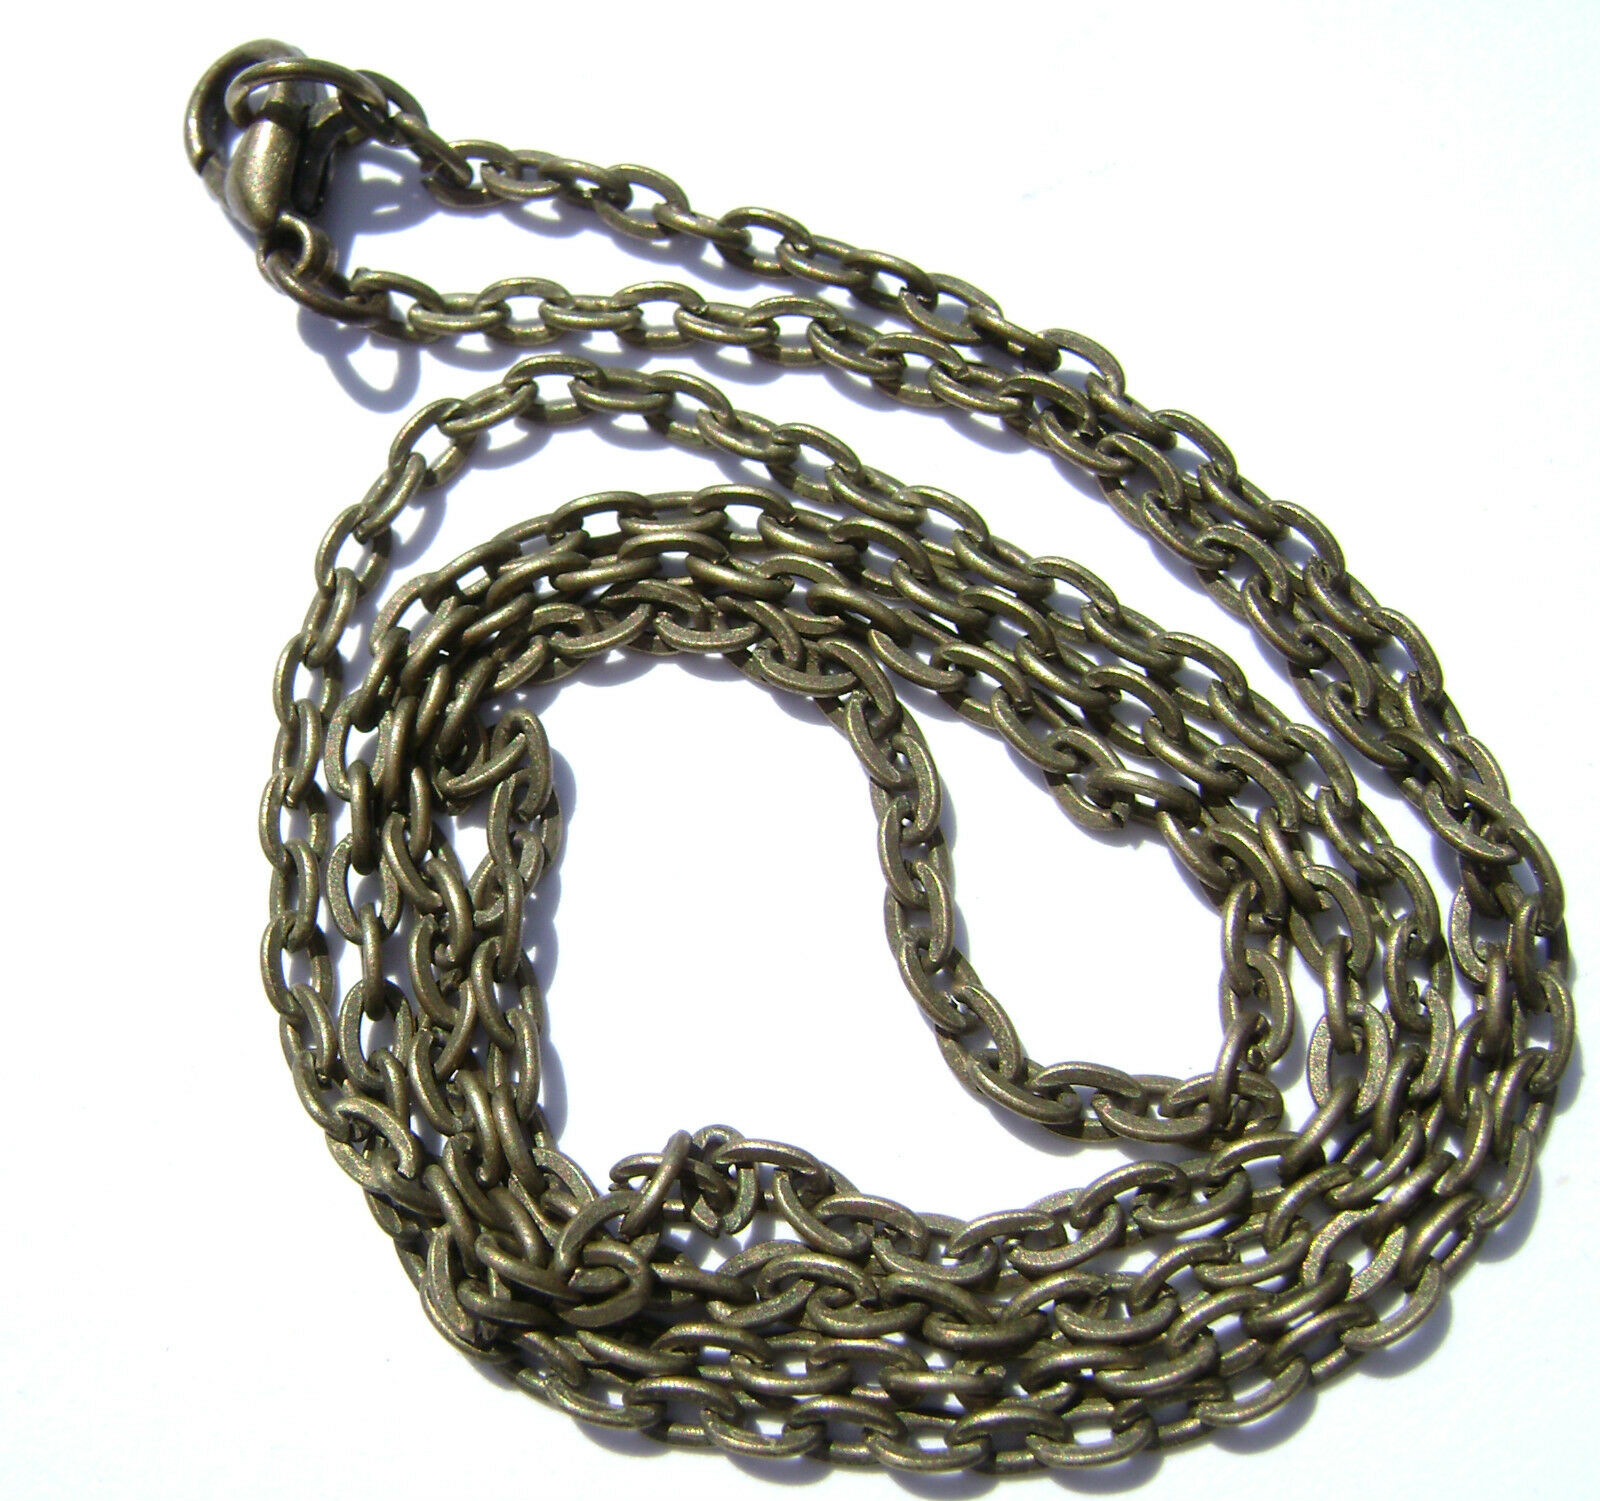 Chain Necklace Handmade Antiqued Brass Steel All Sizes 16" To 50"  -  5 Or 1 Qty